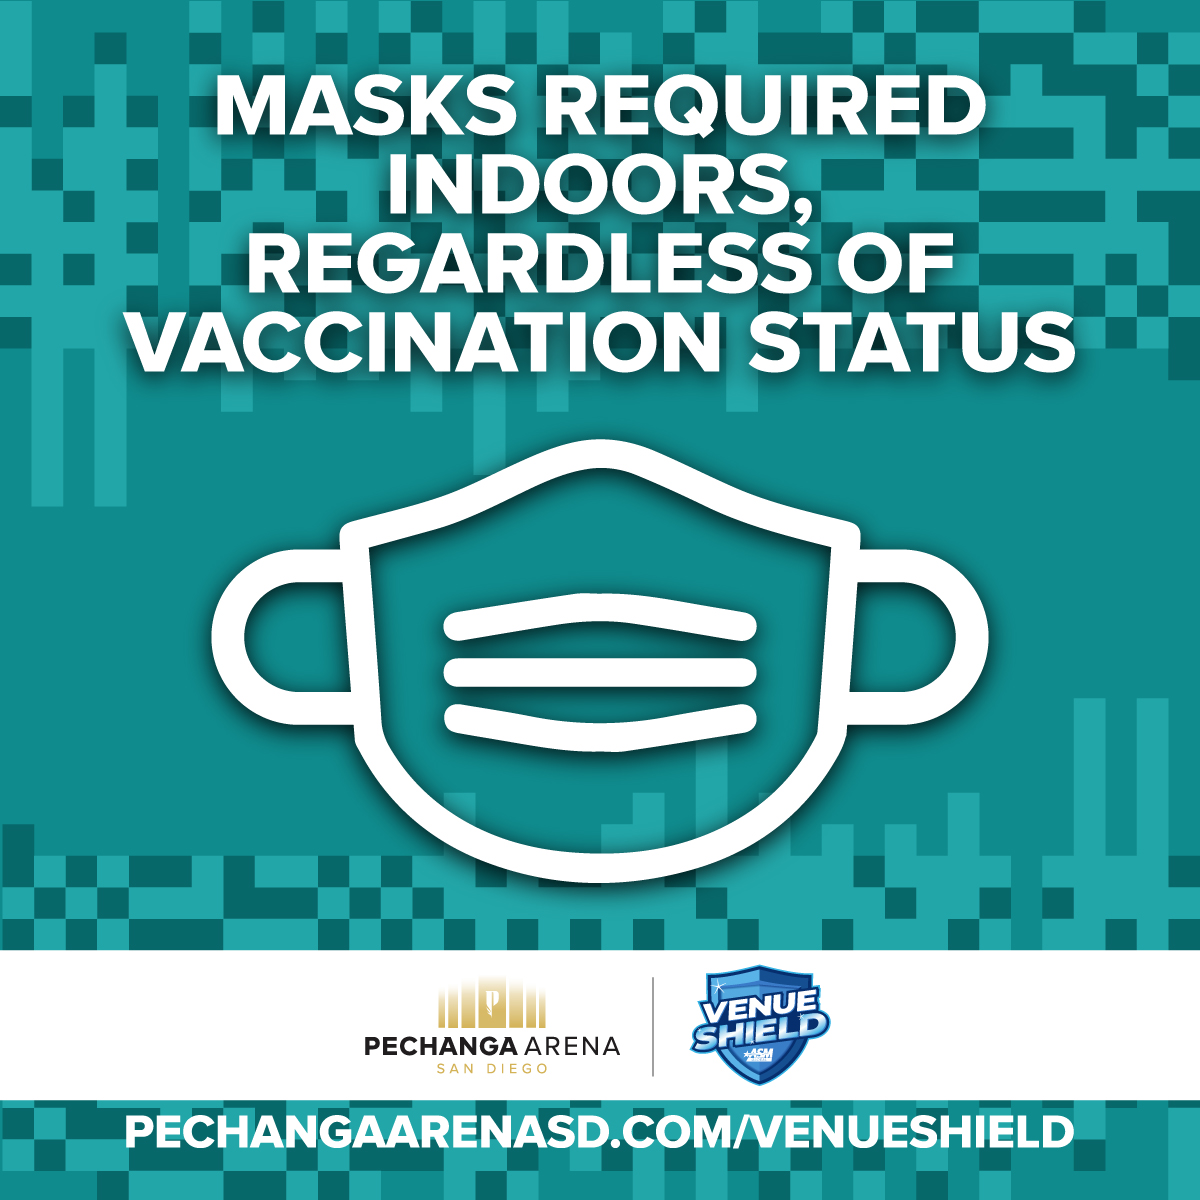 Masks Fequired Indoors Regardless of Vaccination Status